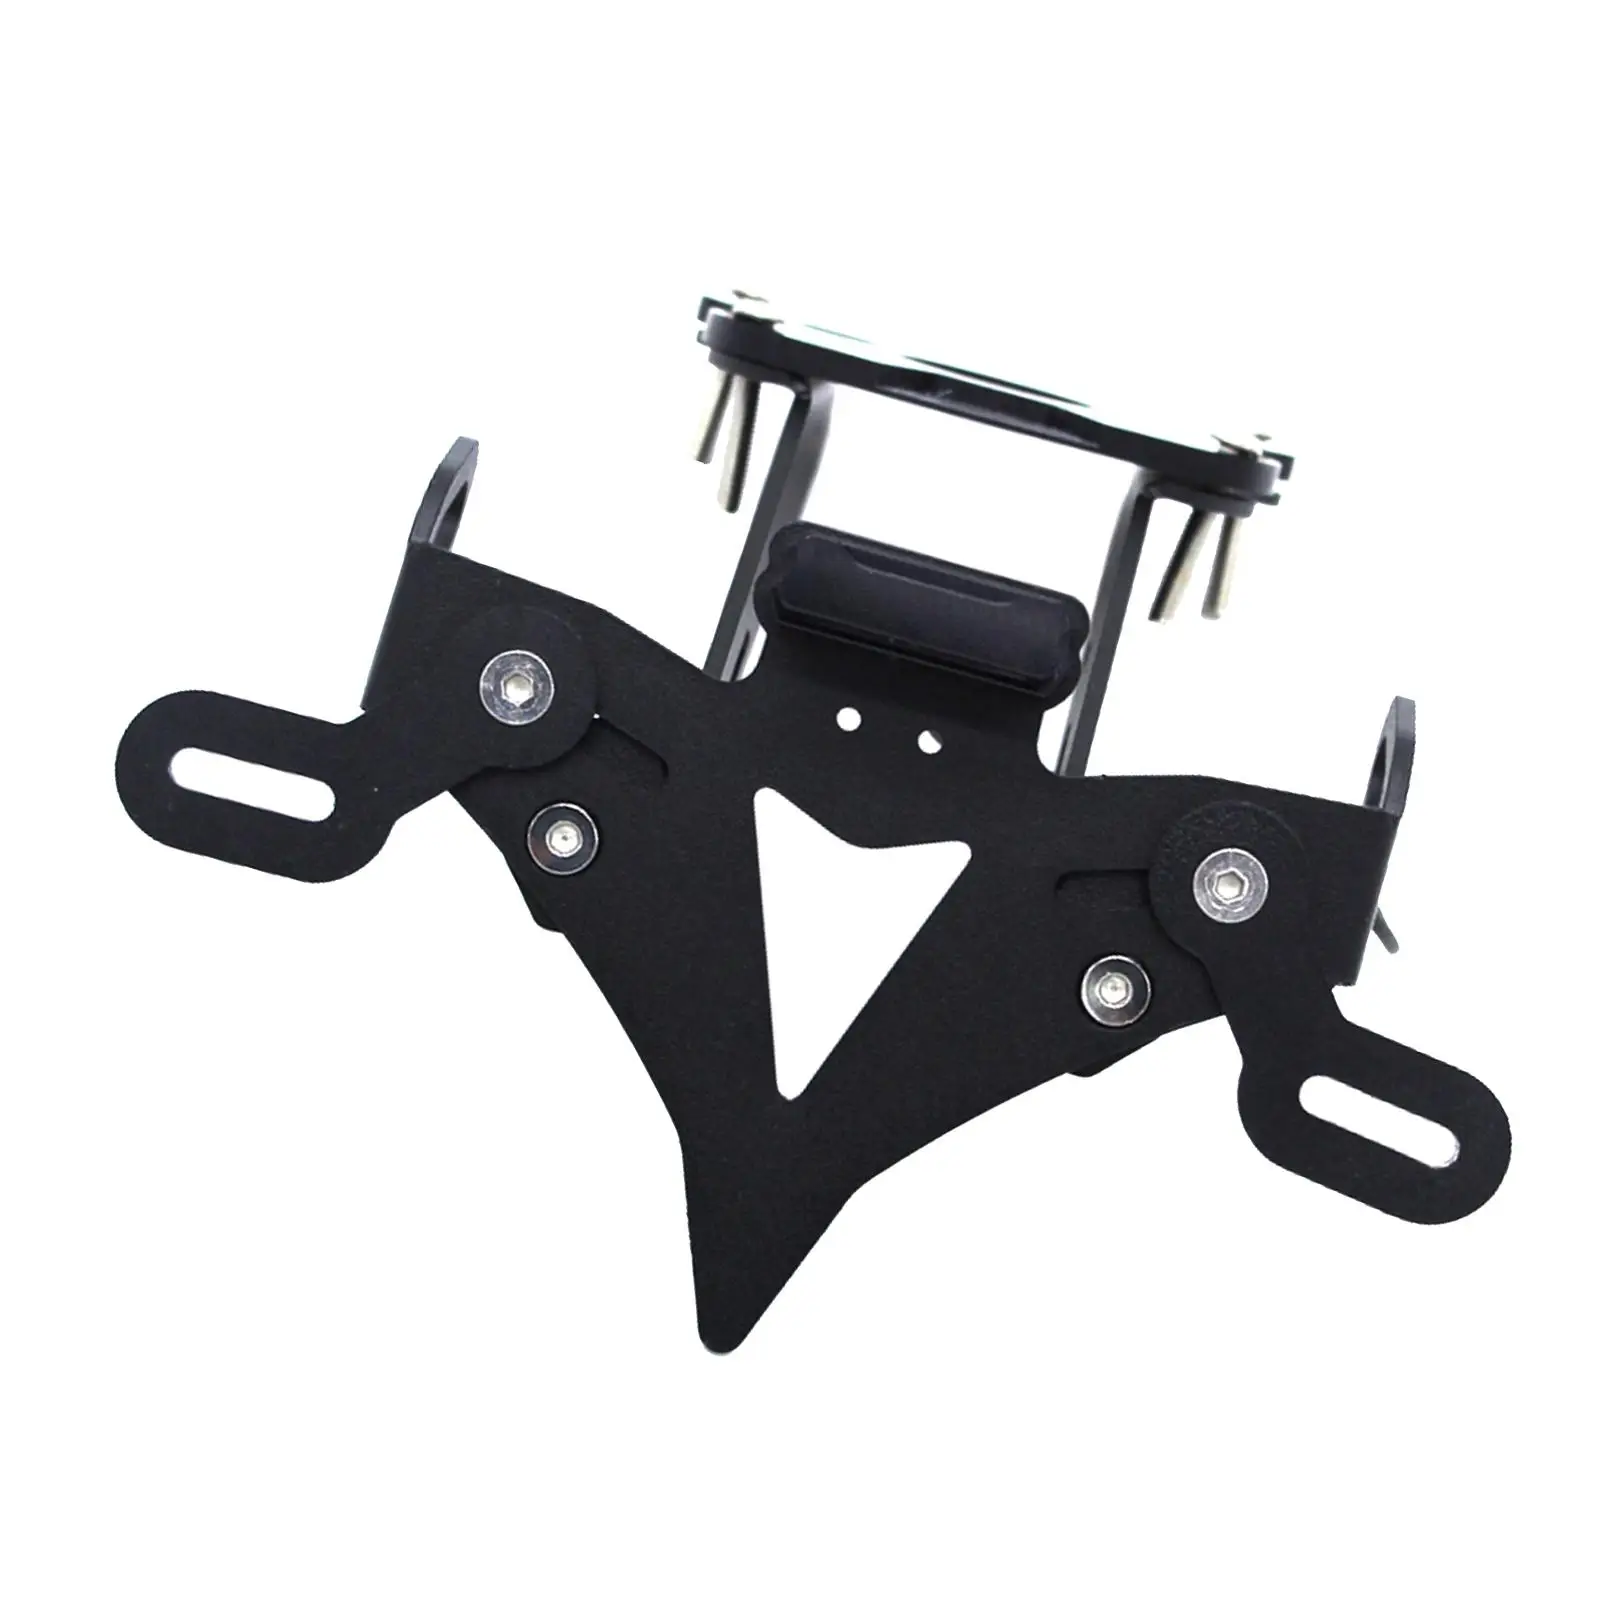 License Plate Holder Spare Parts Motorcycle Accessories Easy to Install Frame